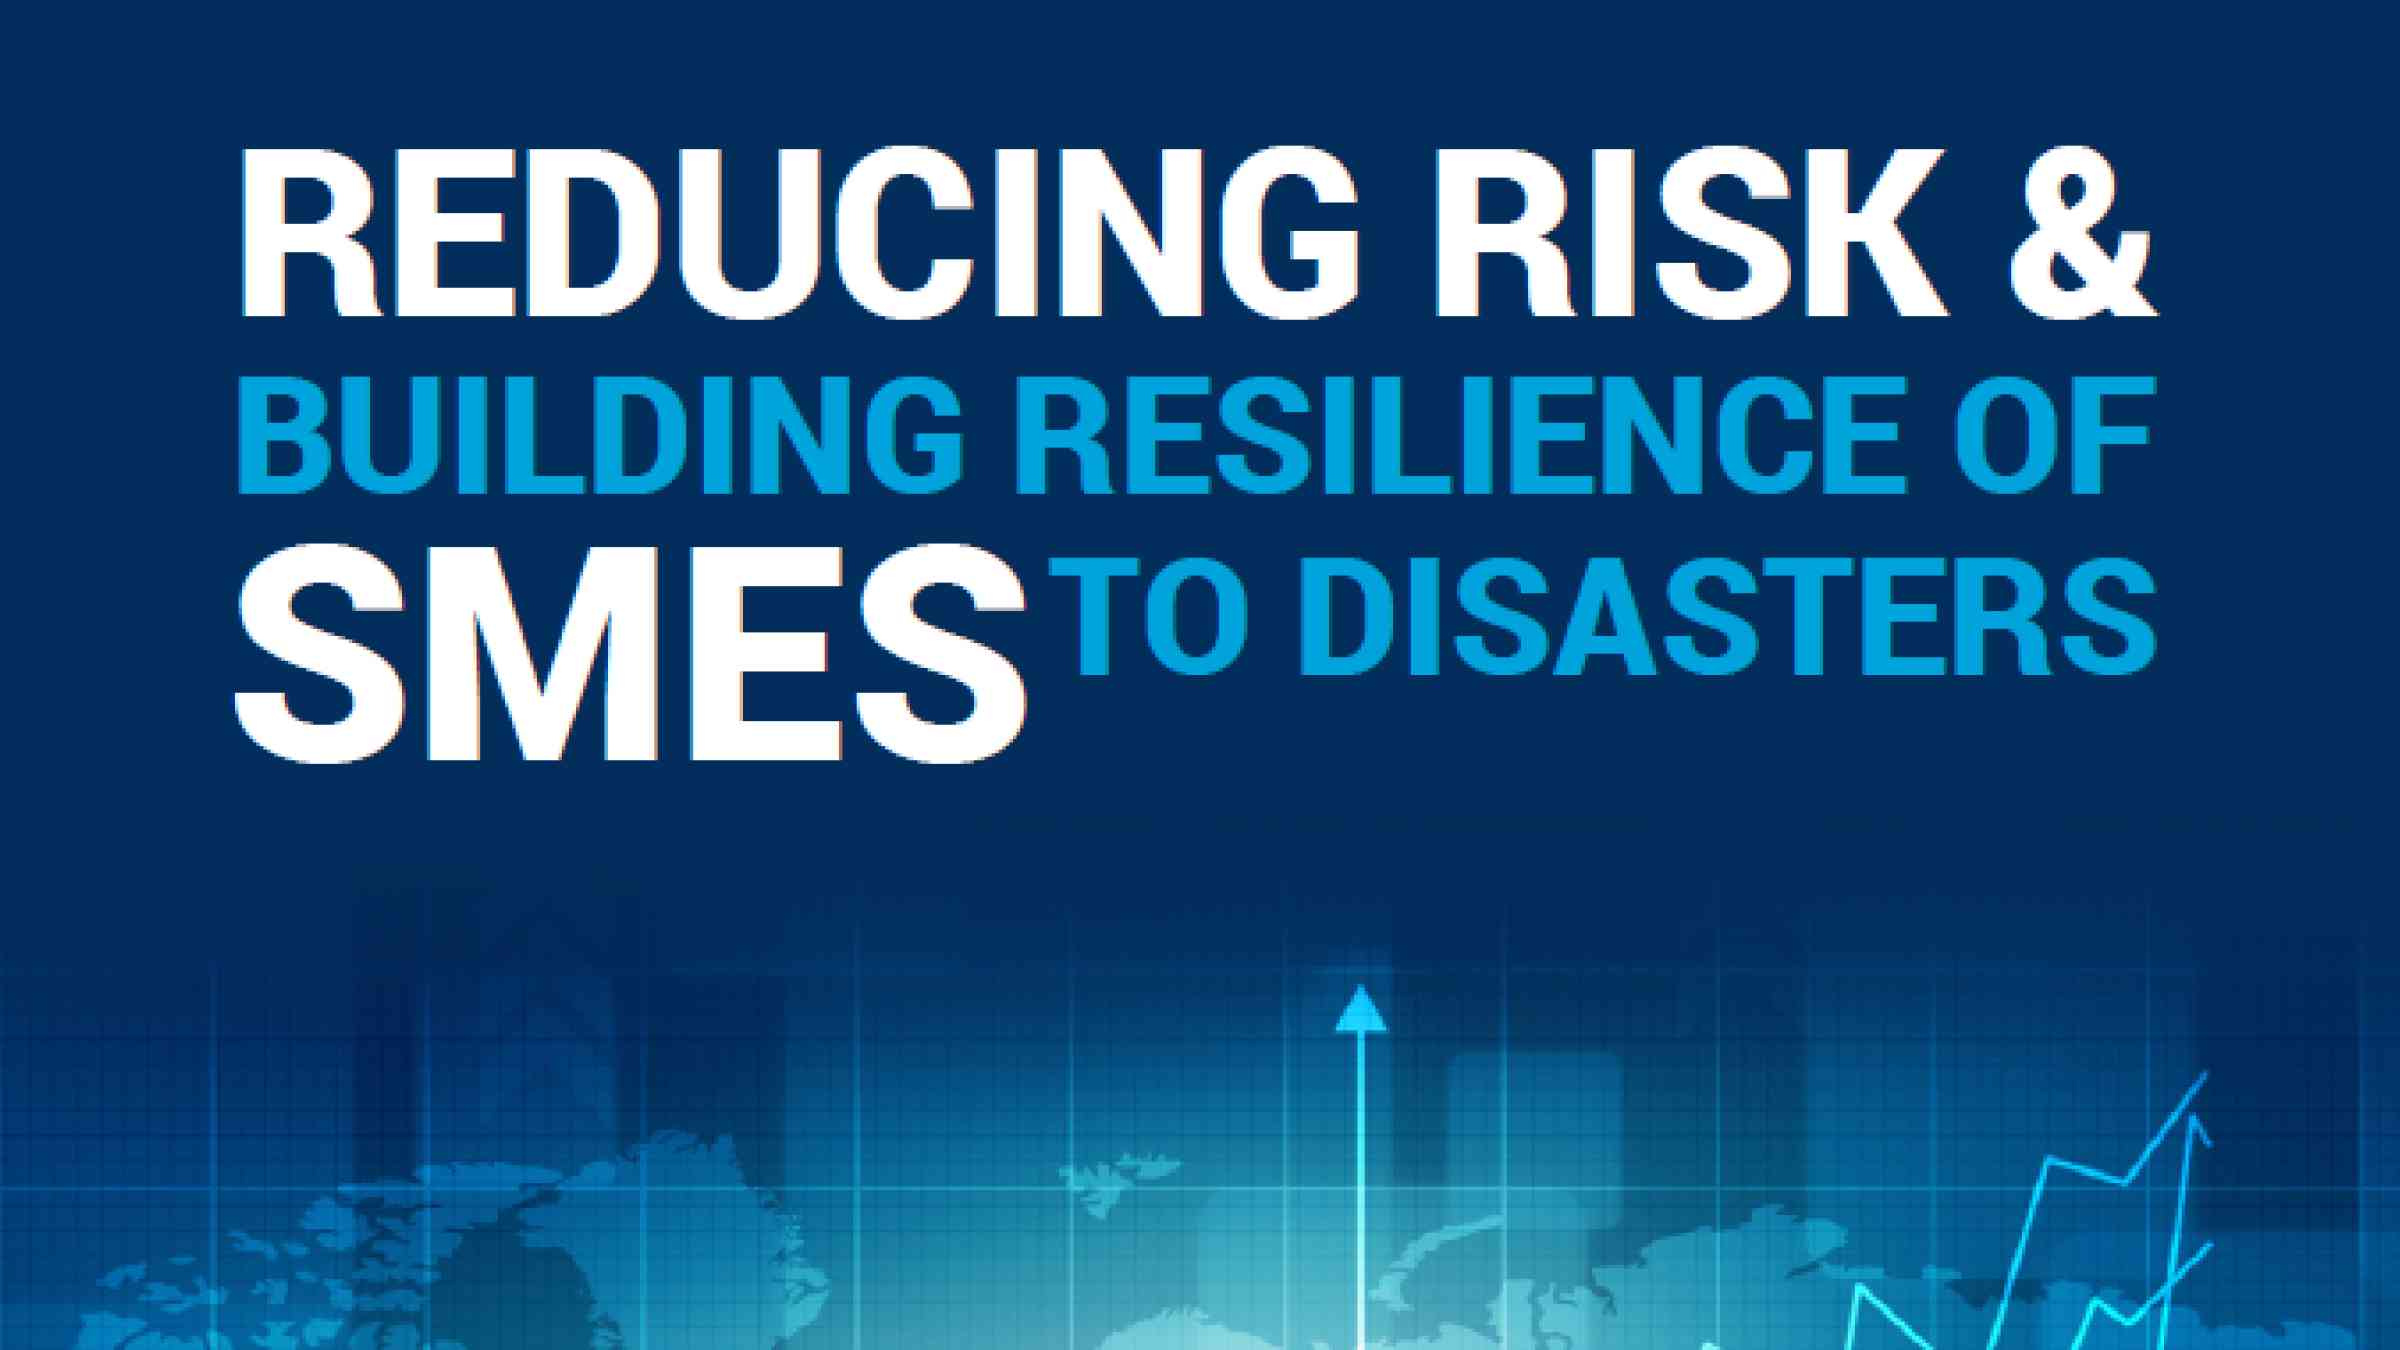 Resilience of SMEs | UNDRR